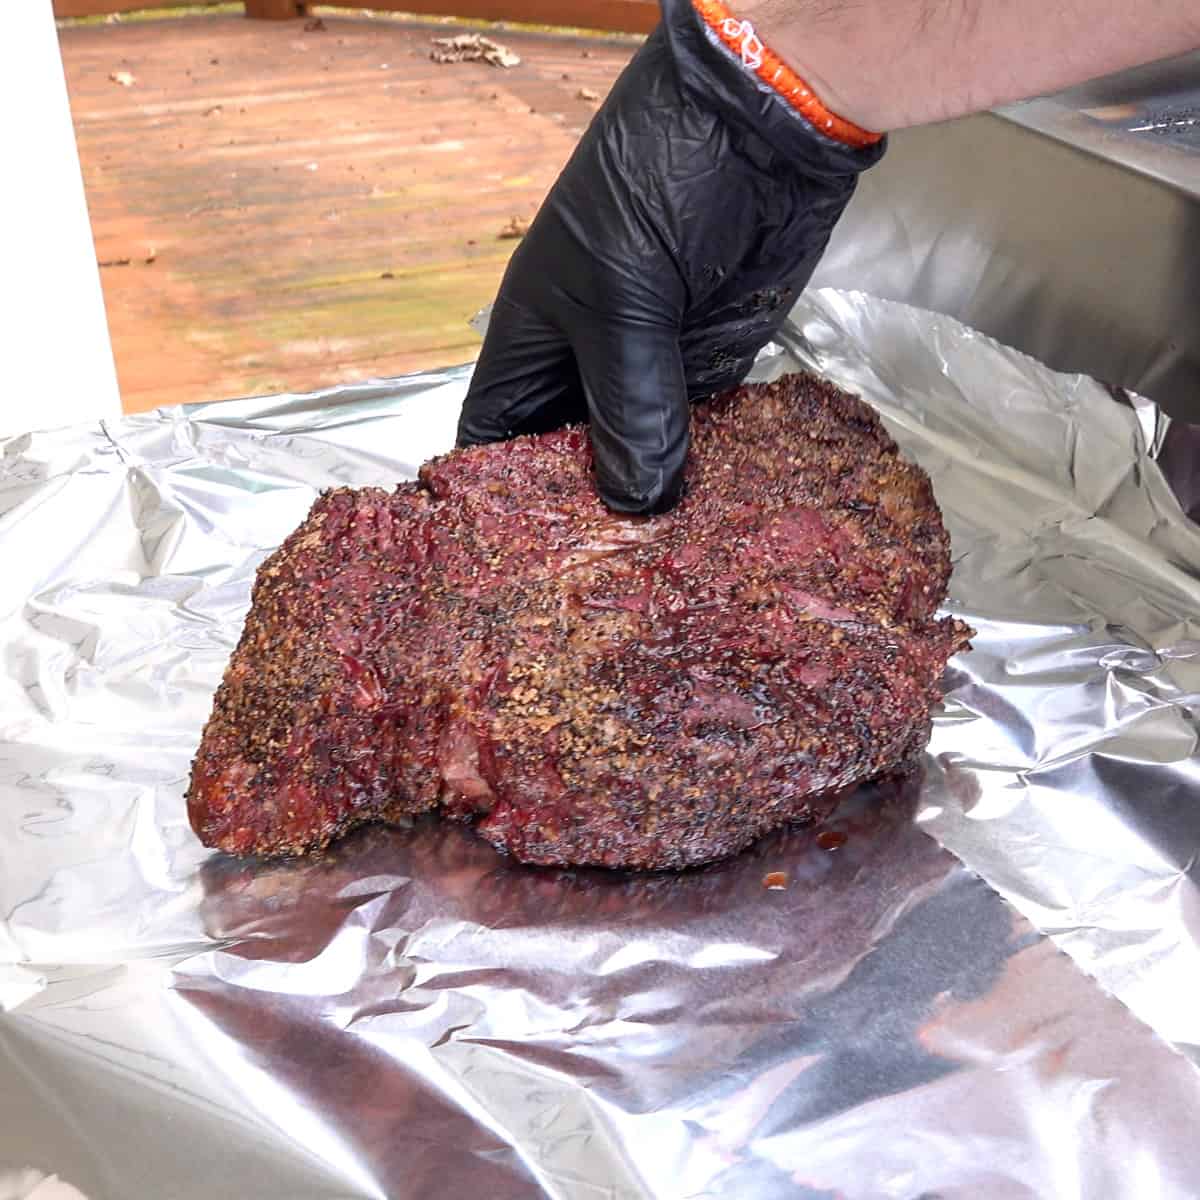 Smoked chuck roast being placed on aluminum foil